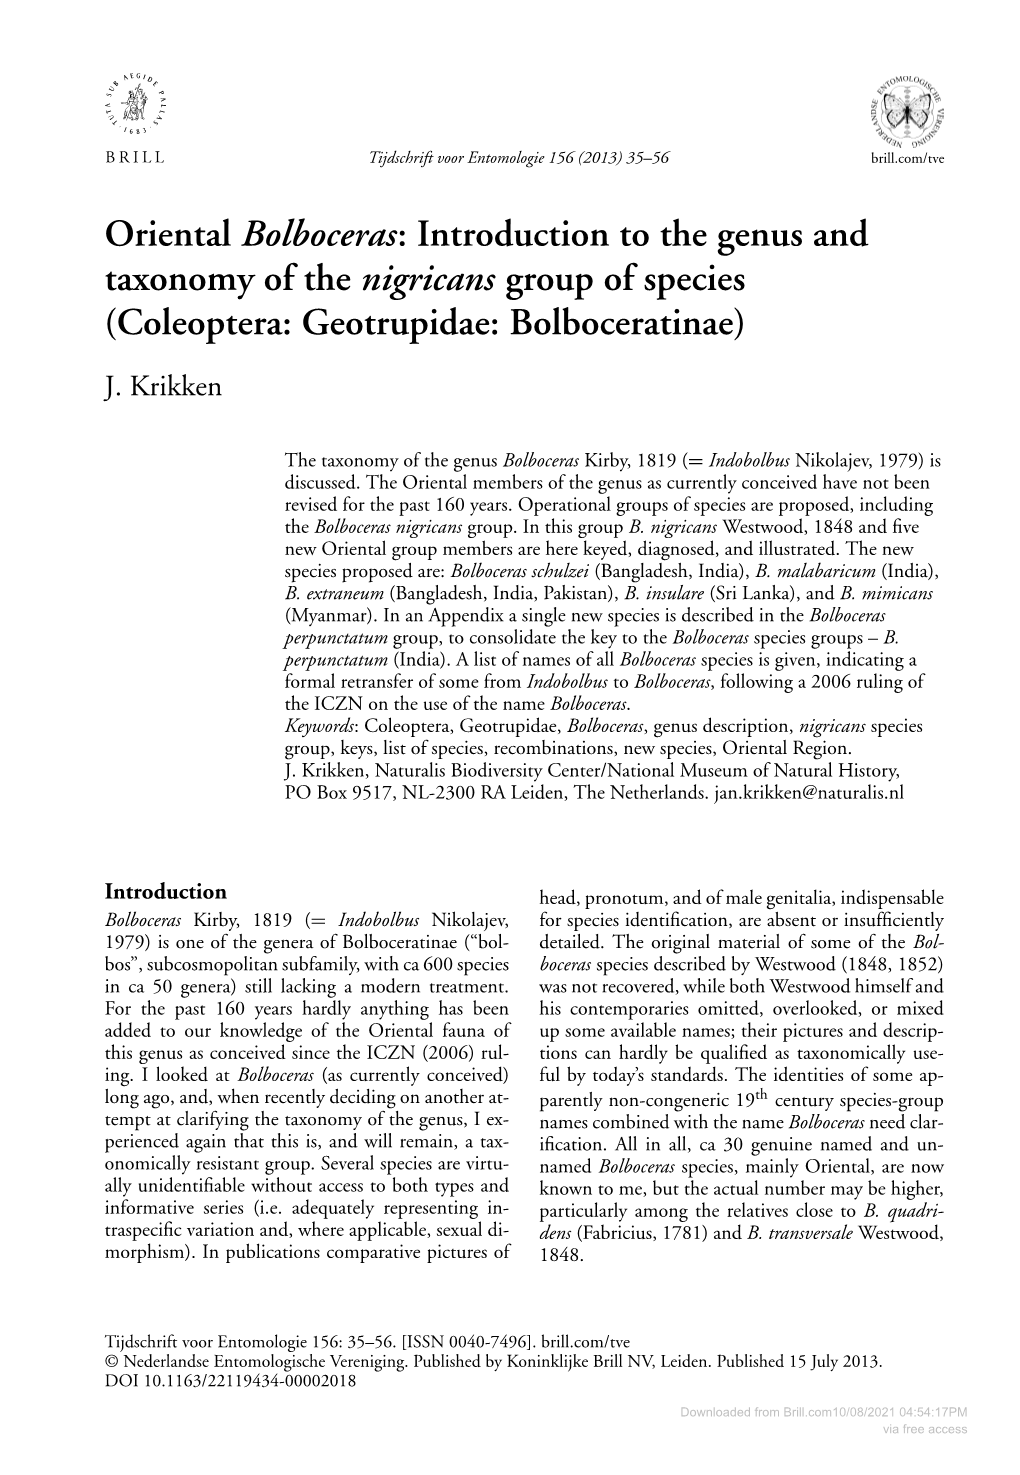 Oriental Bolboceras: Introduction to the Genus and Taxonomy of the Nigricans Group of Species (Coleoptera: Geotrupidae: Bolboceratinae) J